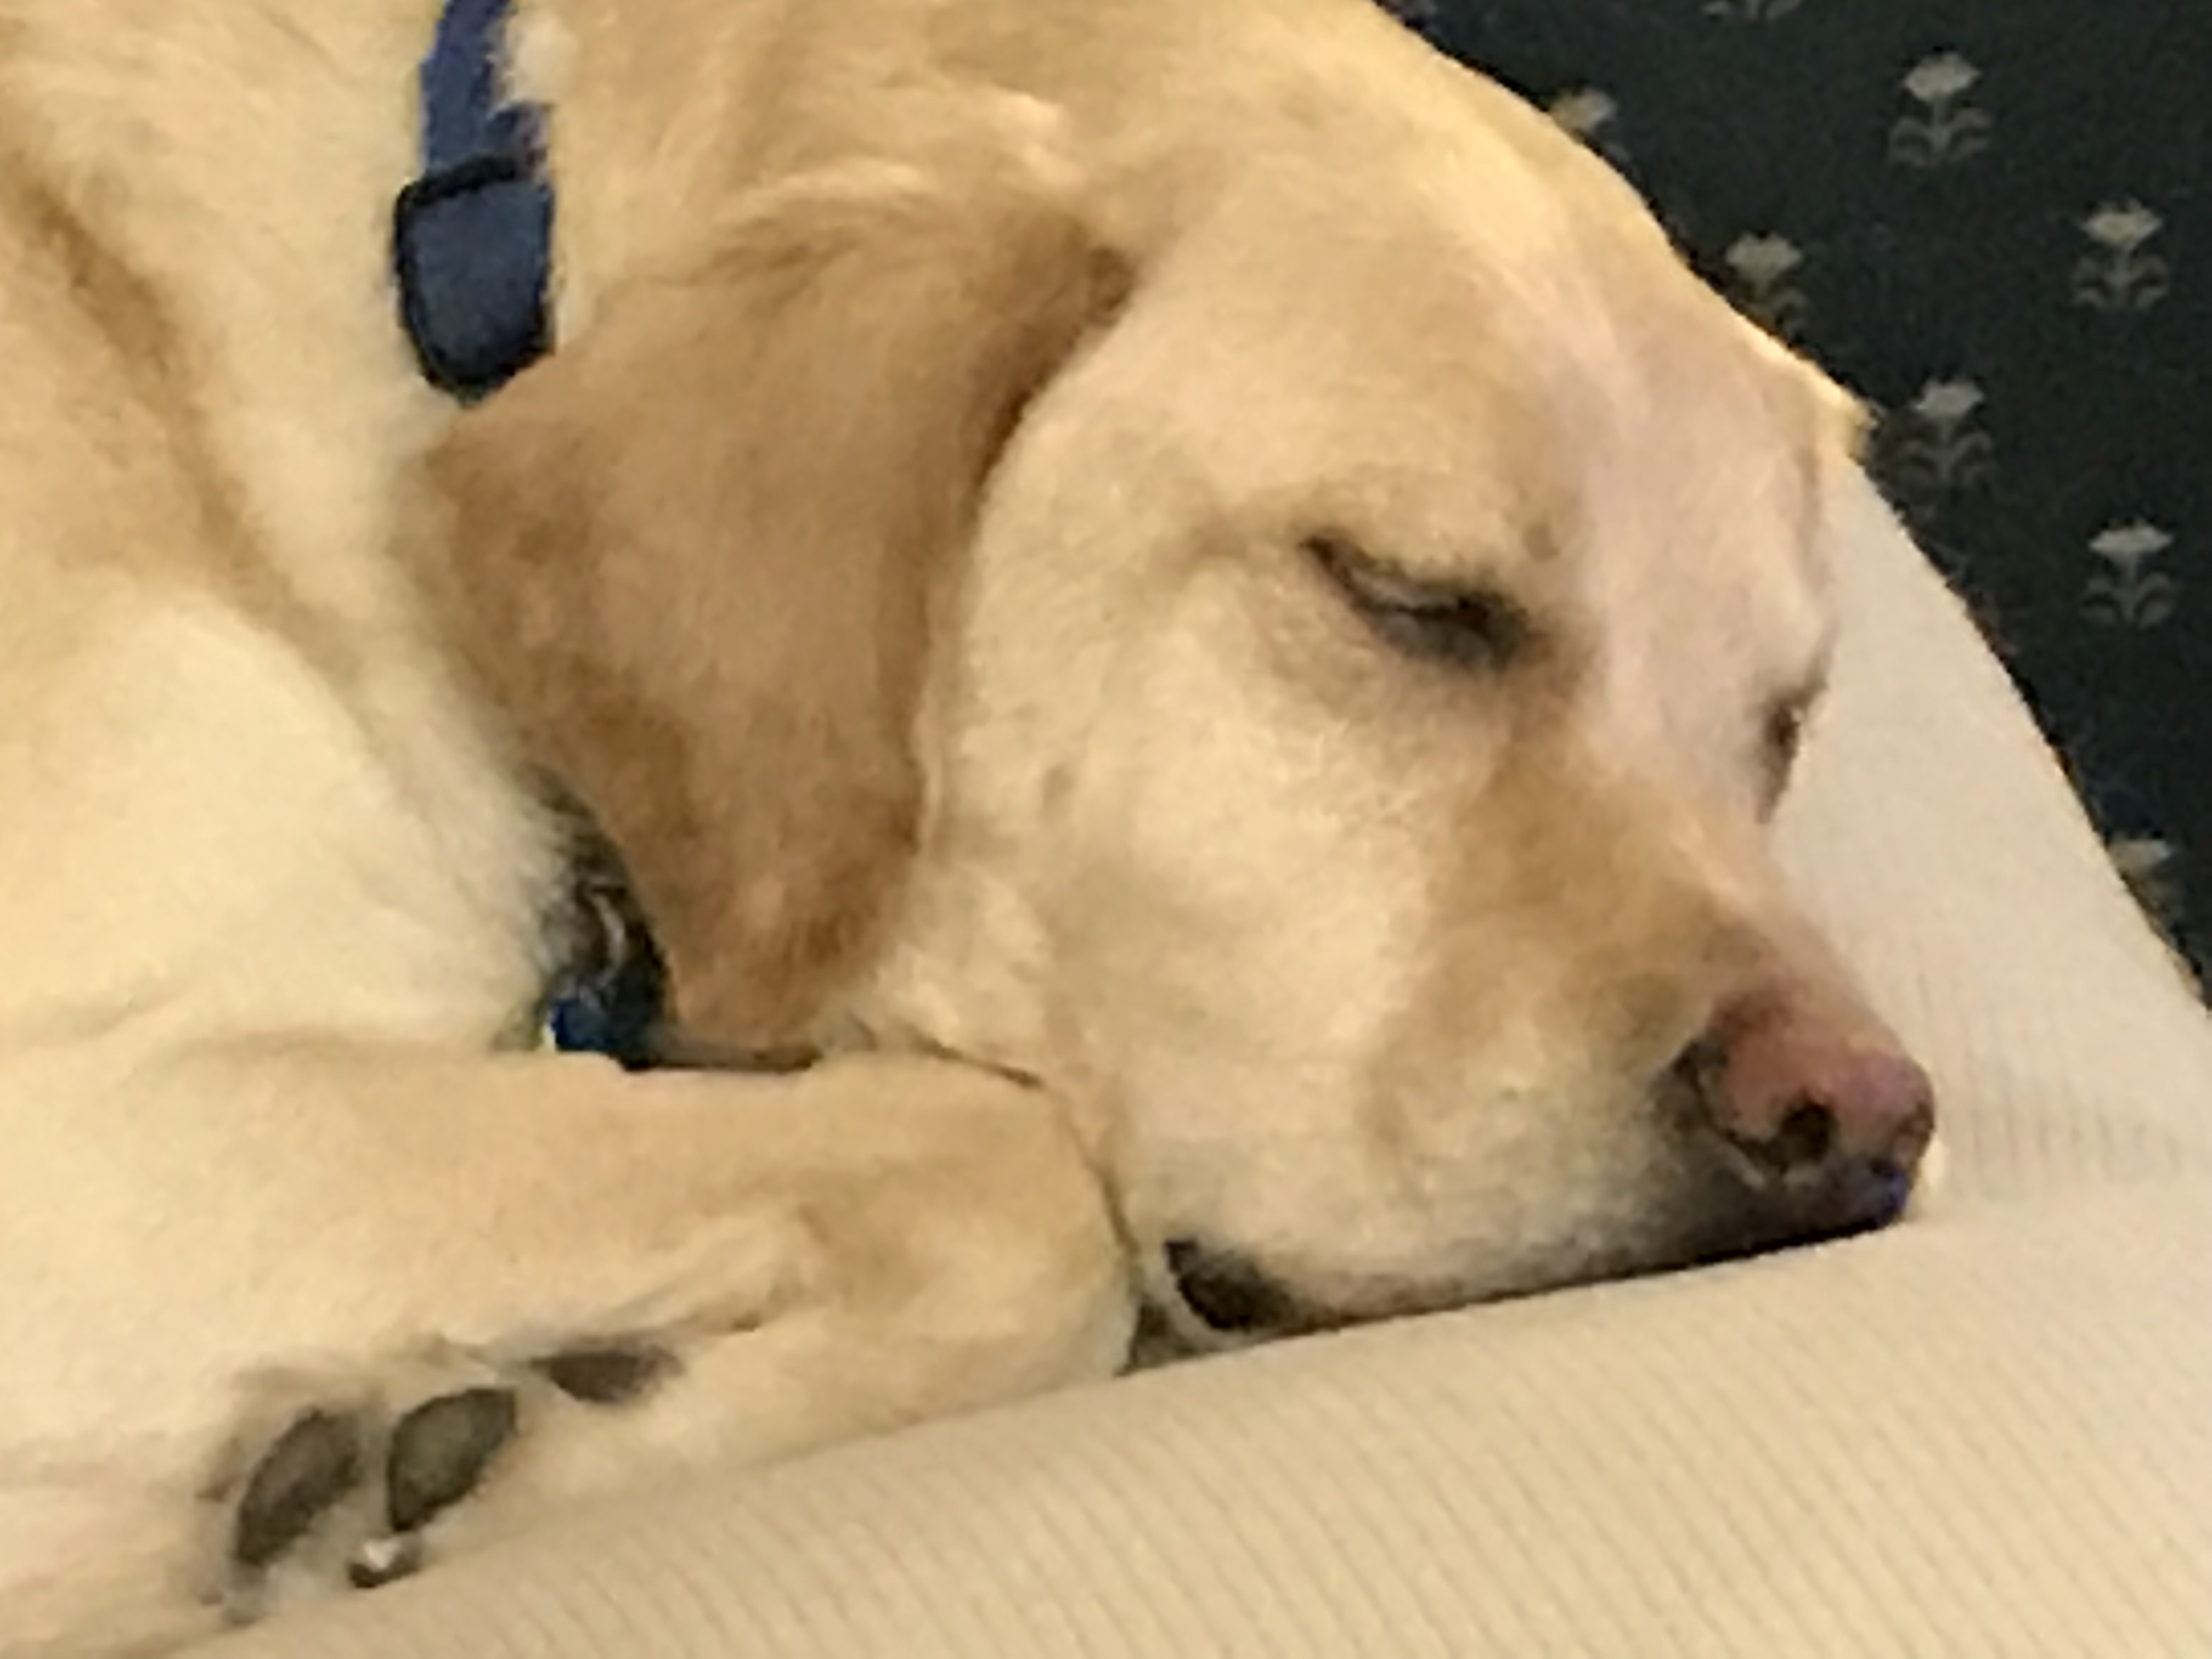 Chip (yellow lab) sleeps on the couch.